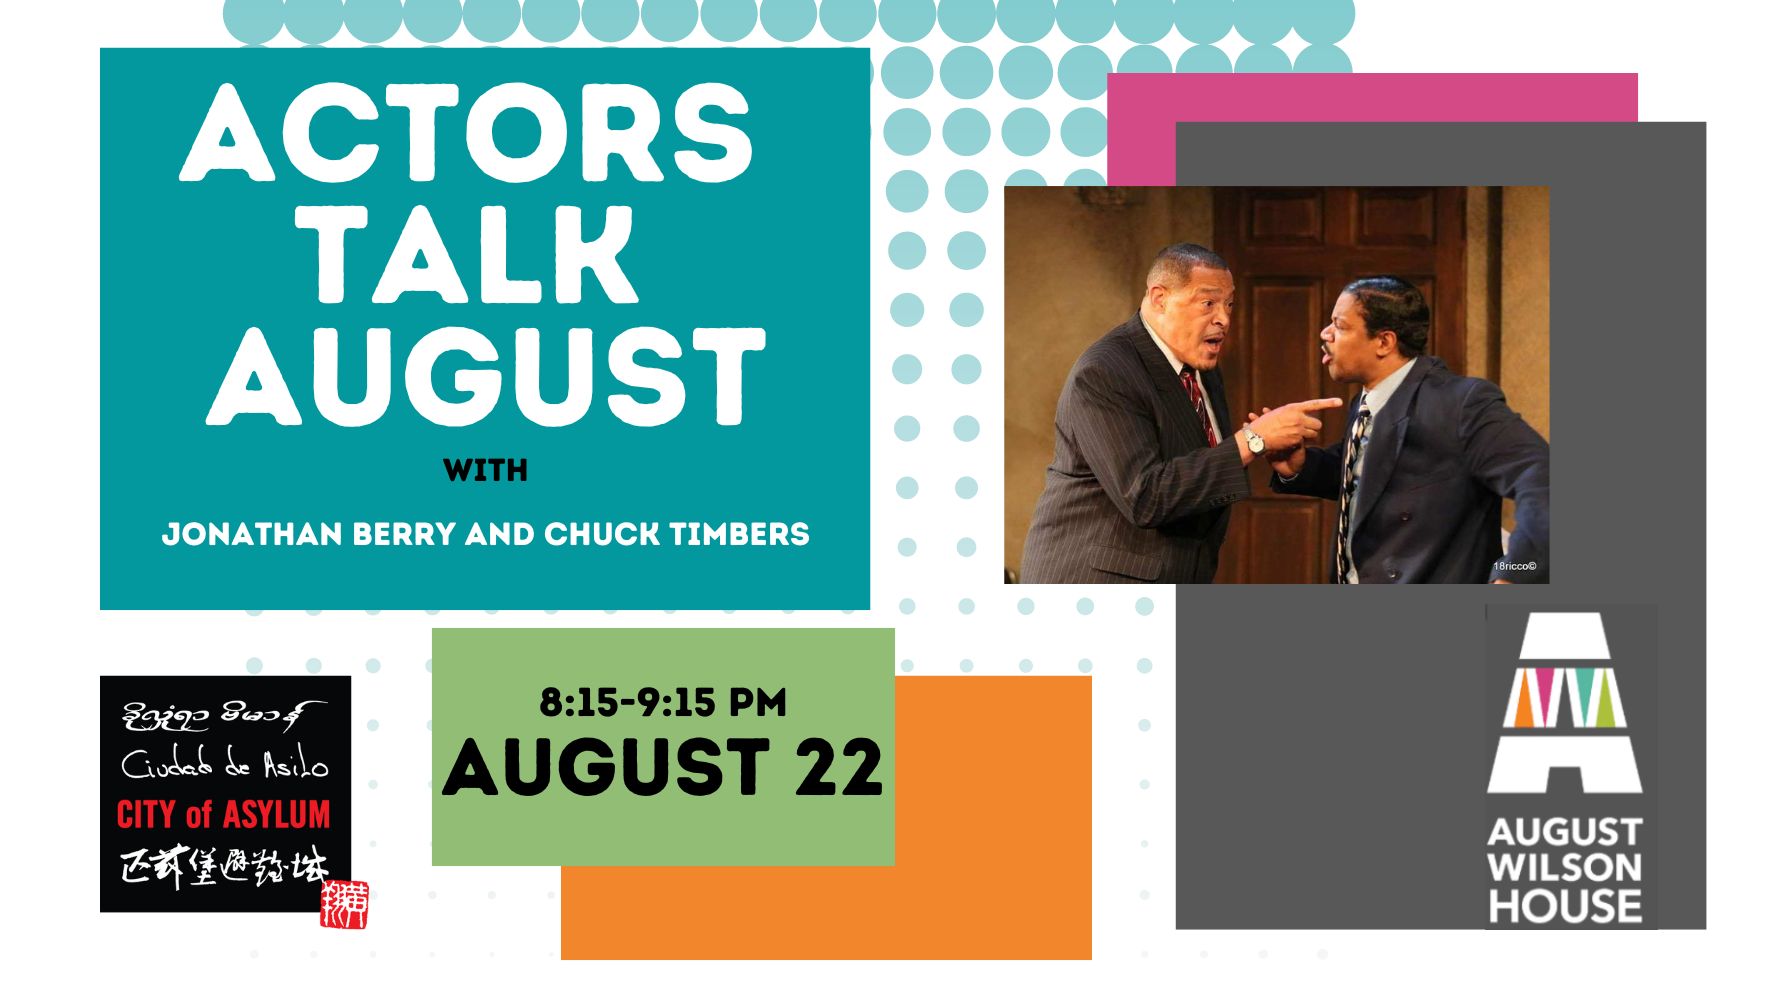 Actors Talk August Presented by August Wilson House: Jonathan Berry and Chuck Timbers